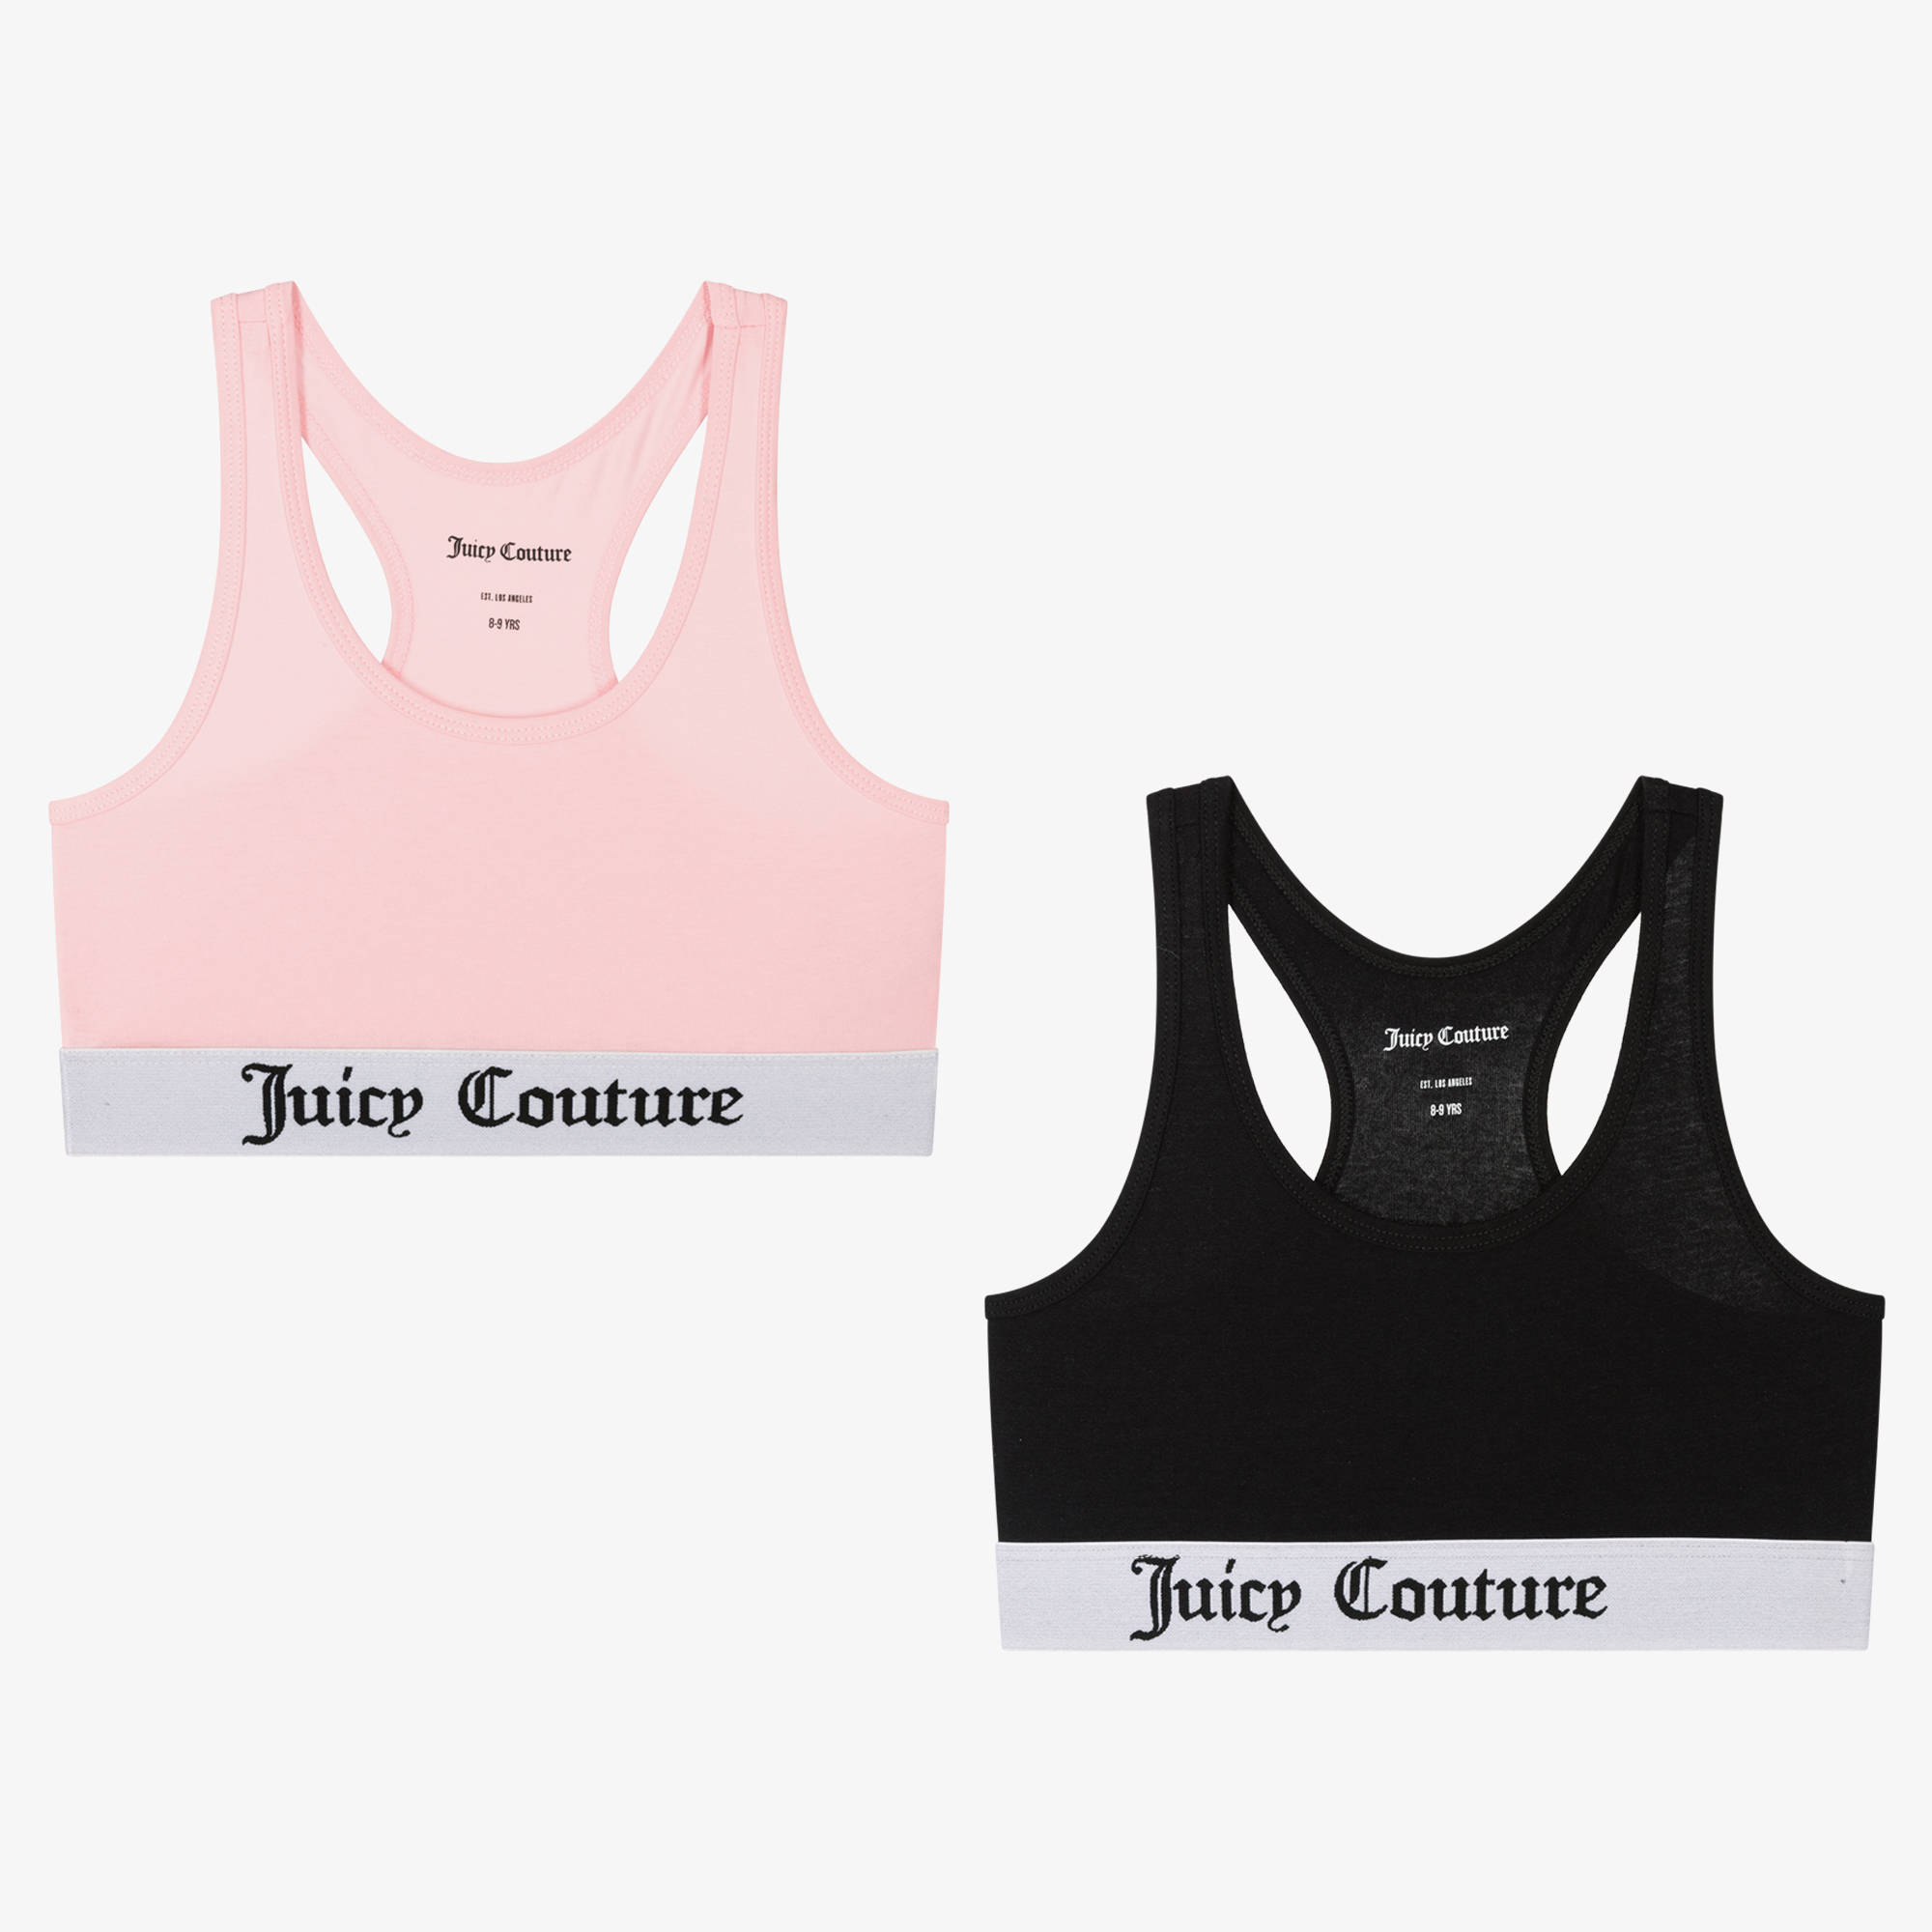 Stylish Juicy Couture Sports Bras - Pack of 2